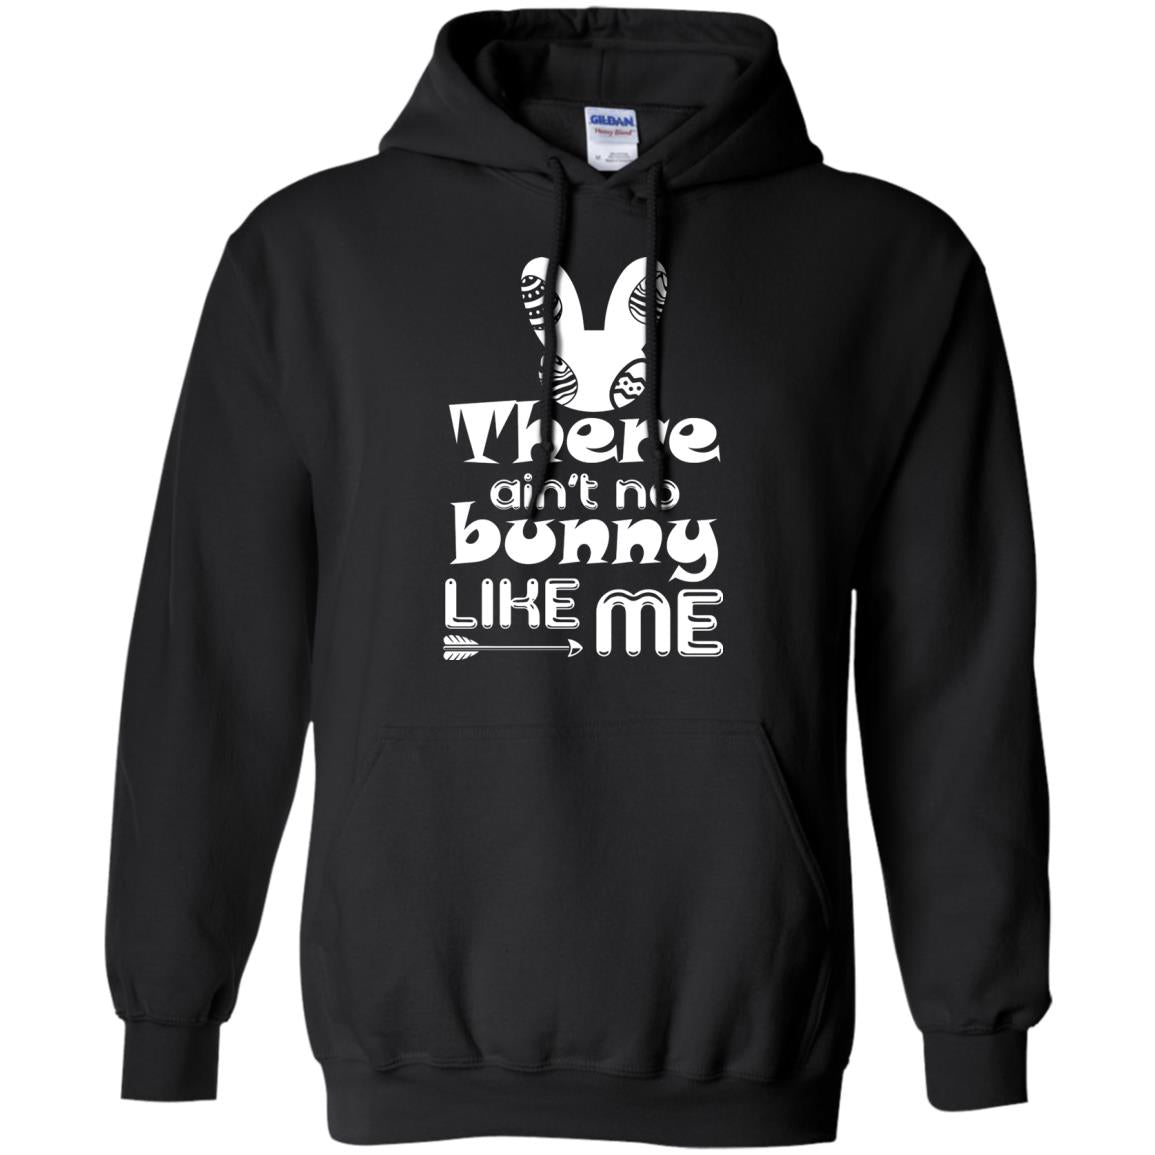 There Ain’t No Bunny Like Me Cool Bunny T-shirt For Easter Holiday